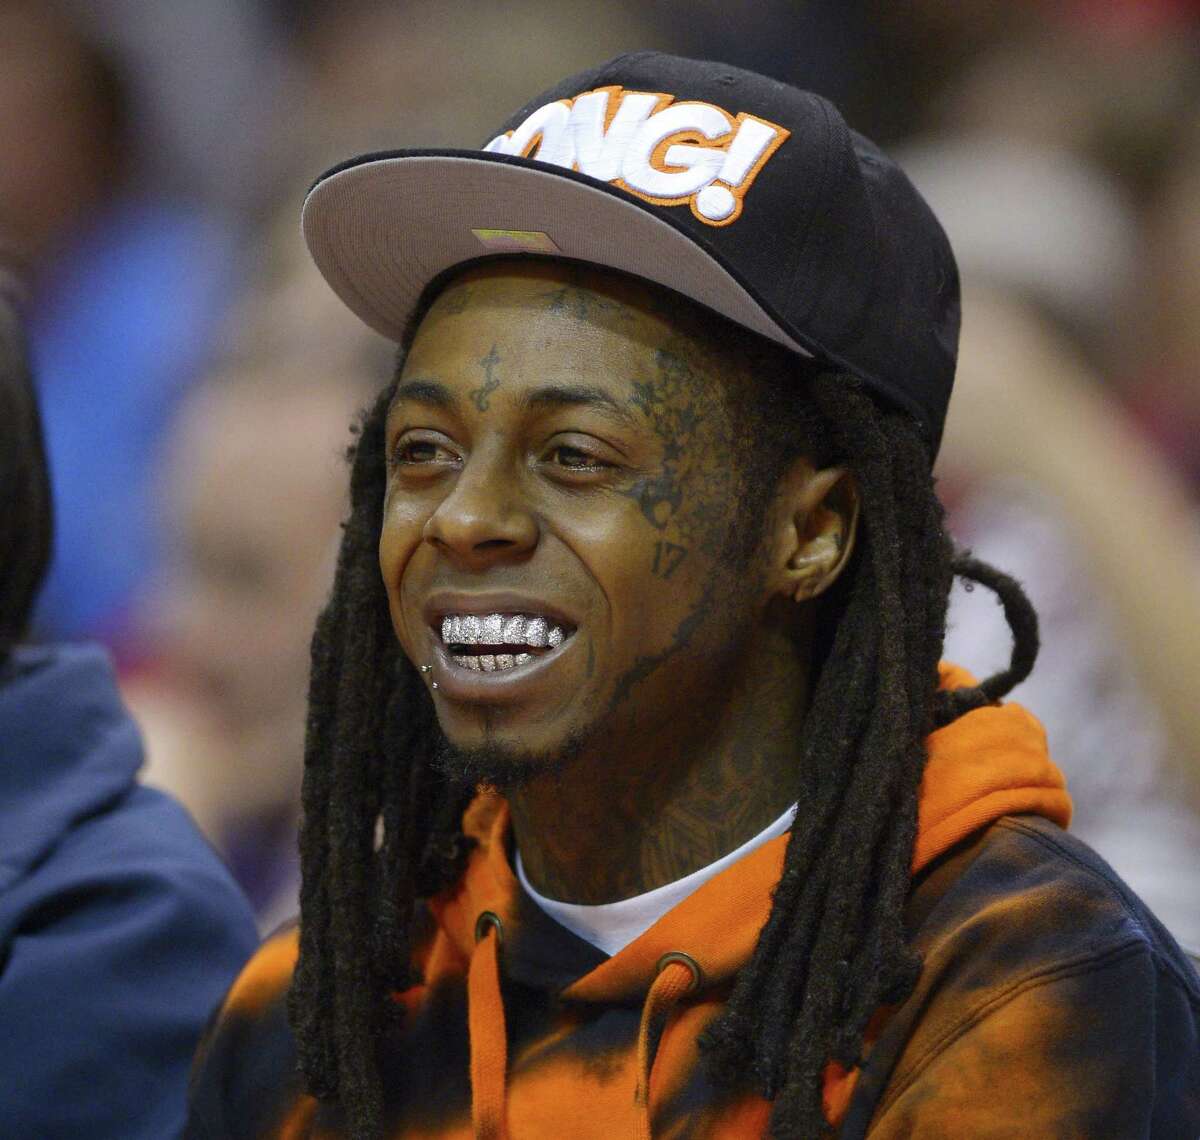 In this 2014 file photo, singer Lil Wayne watches the Los Angeles Clippers play the Houston Rockets during the first half of an NBA basketball game in Los Angeles.